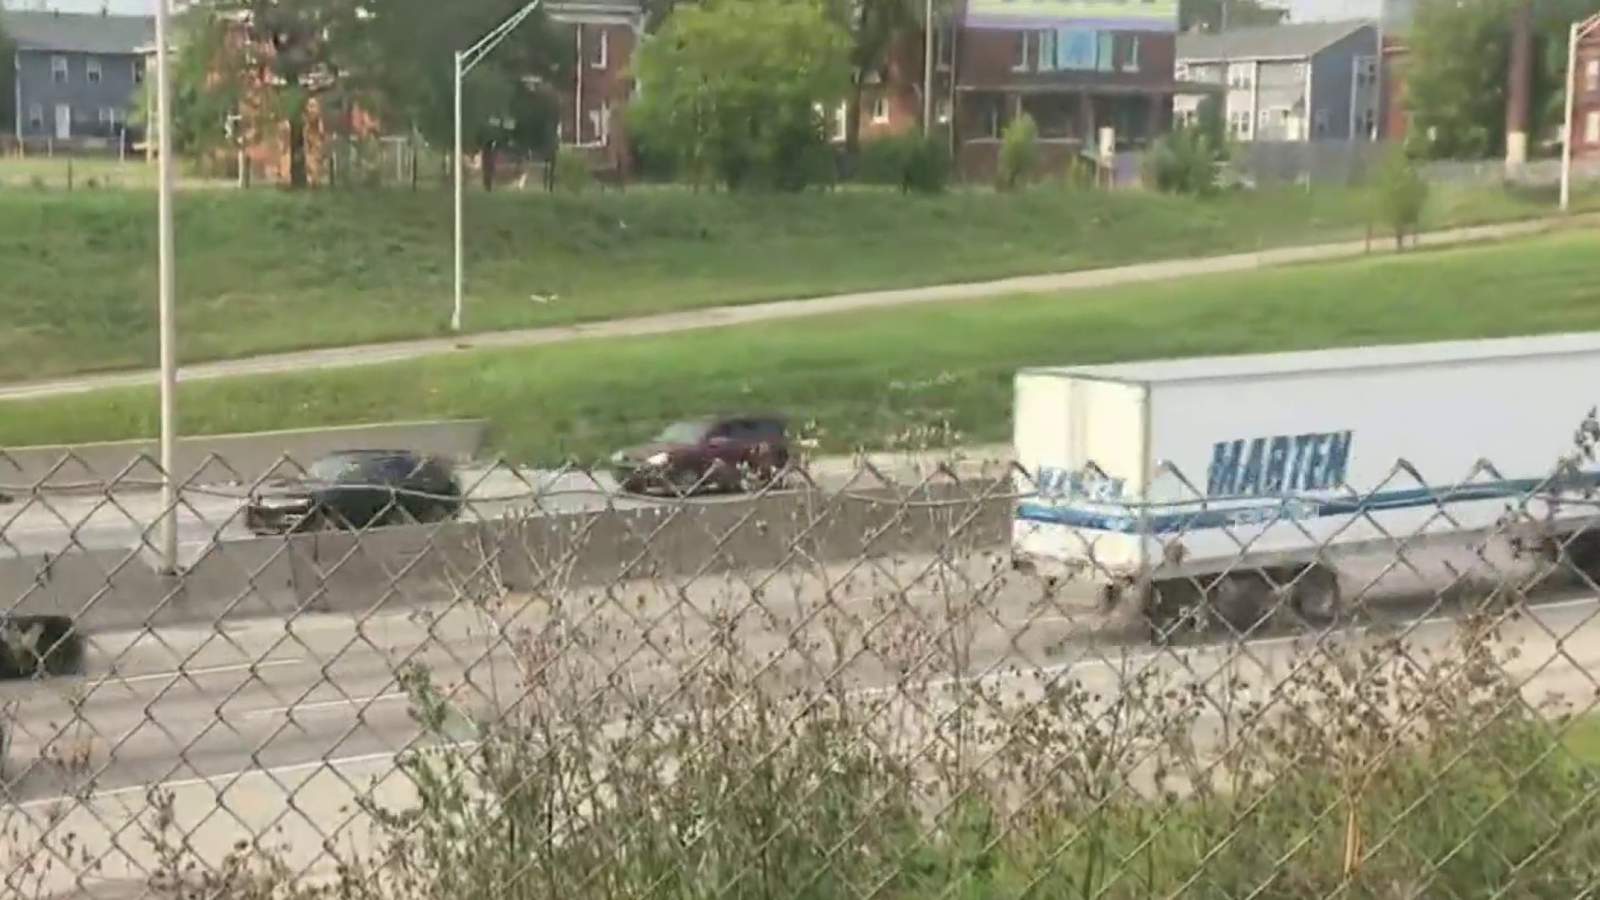 Tow truck driver injured in hit-and-run on I-94